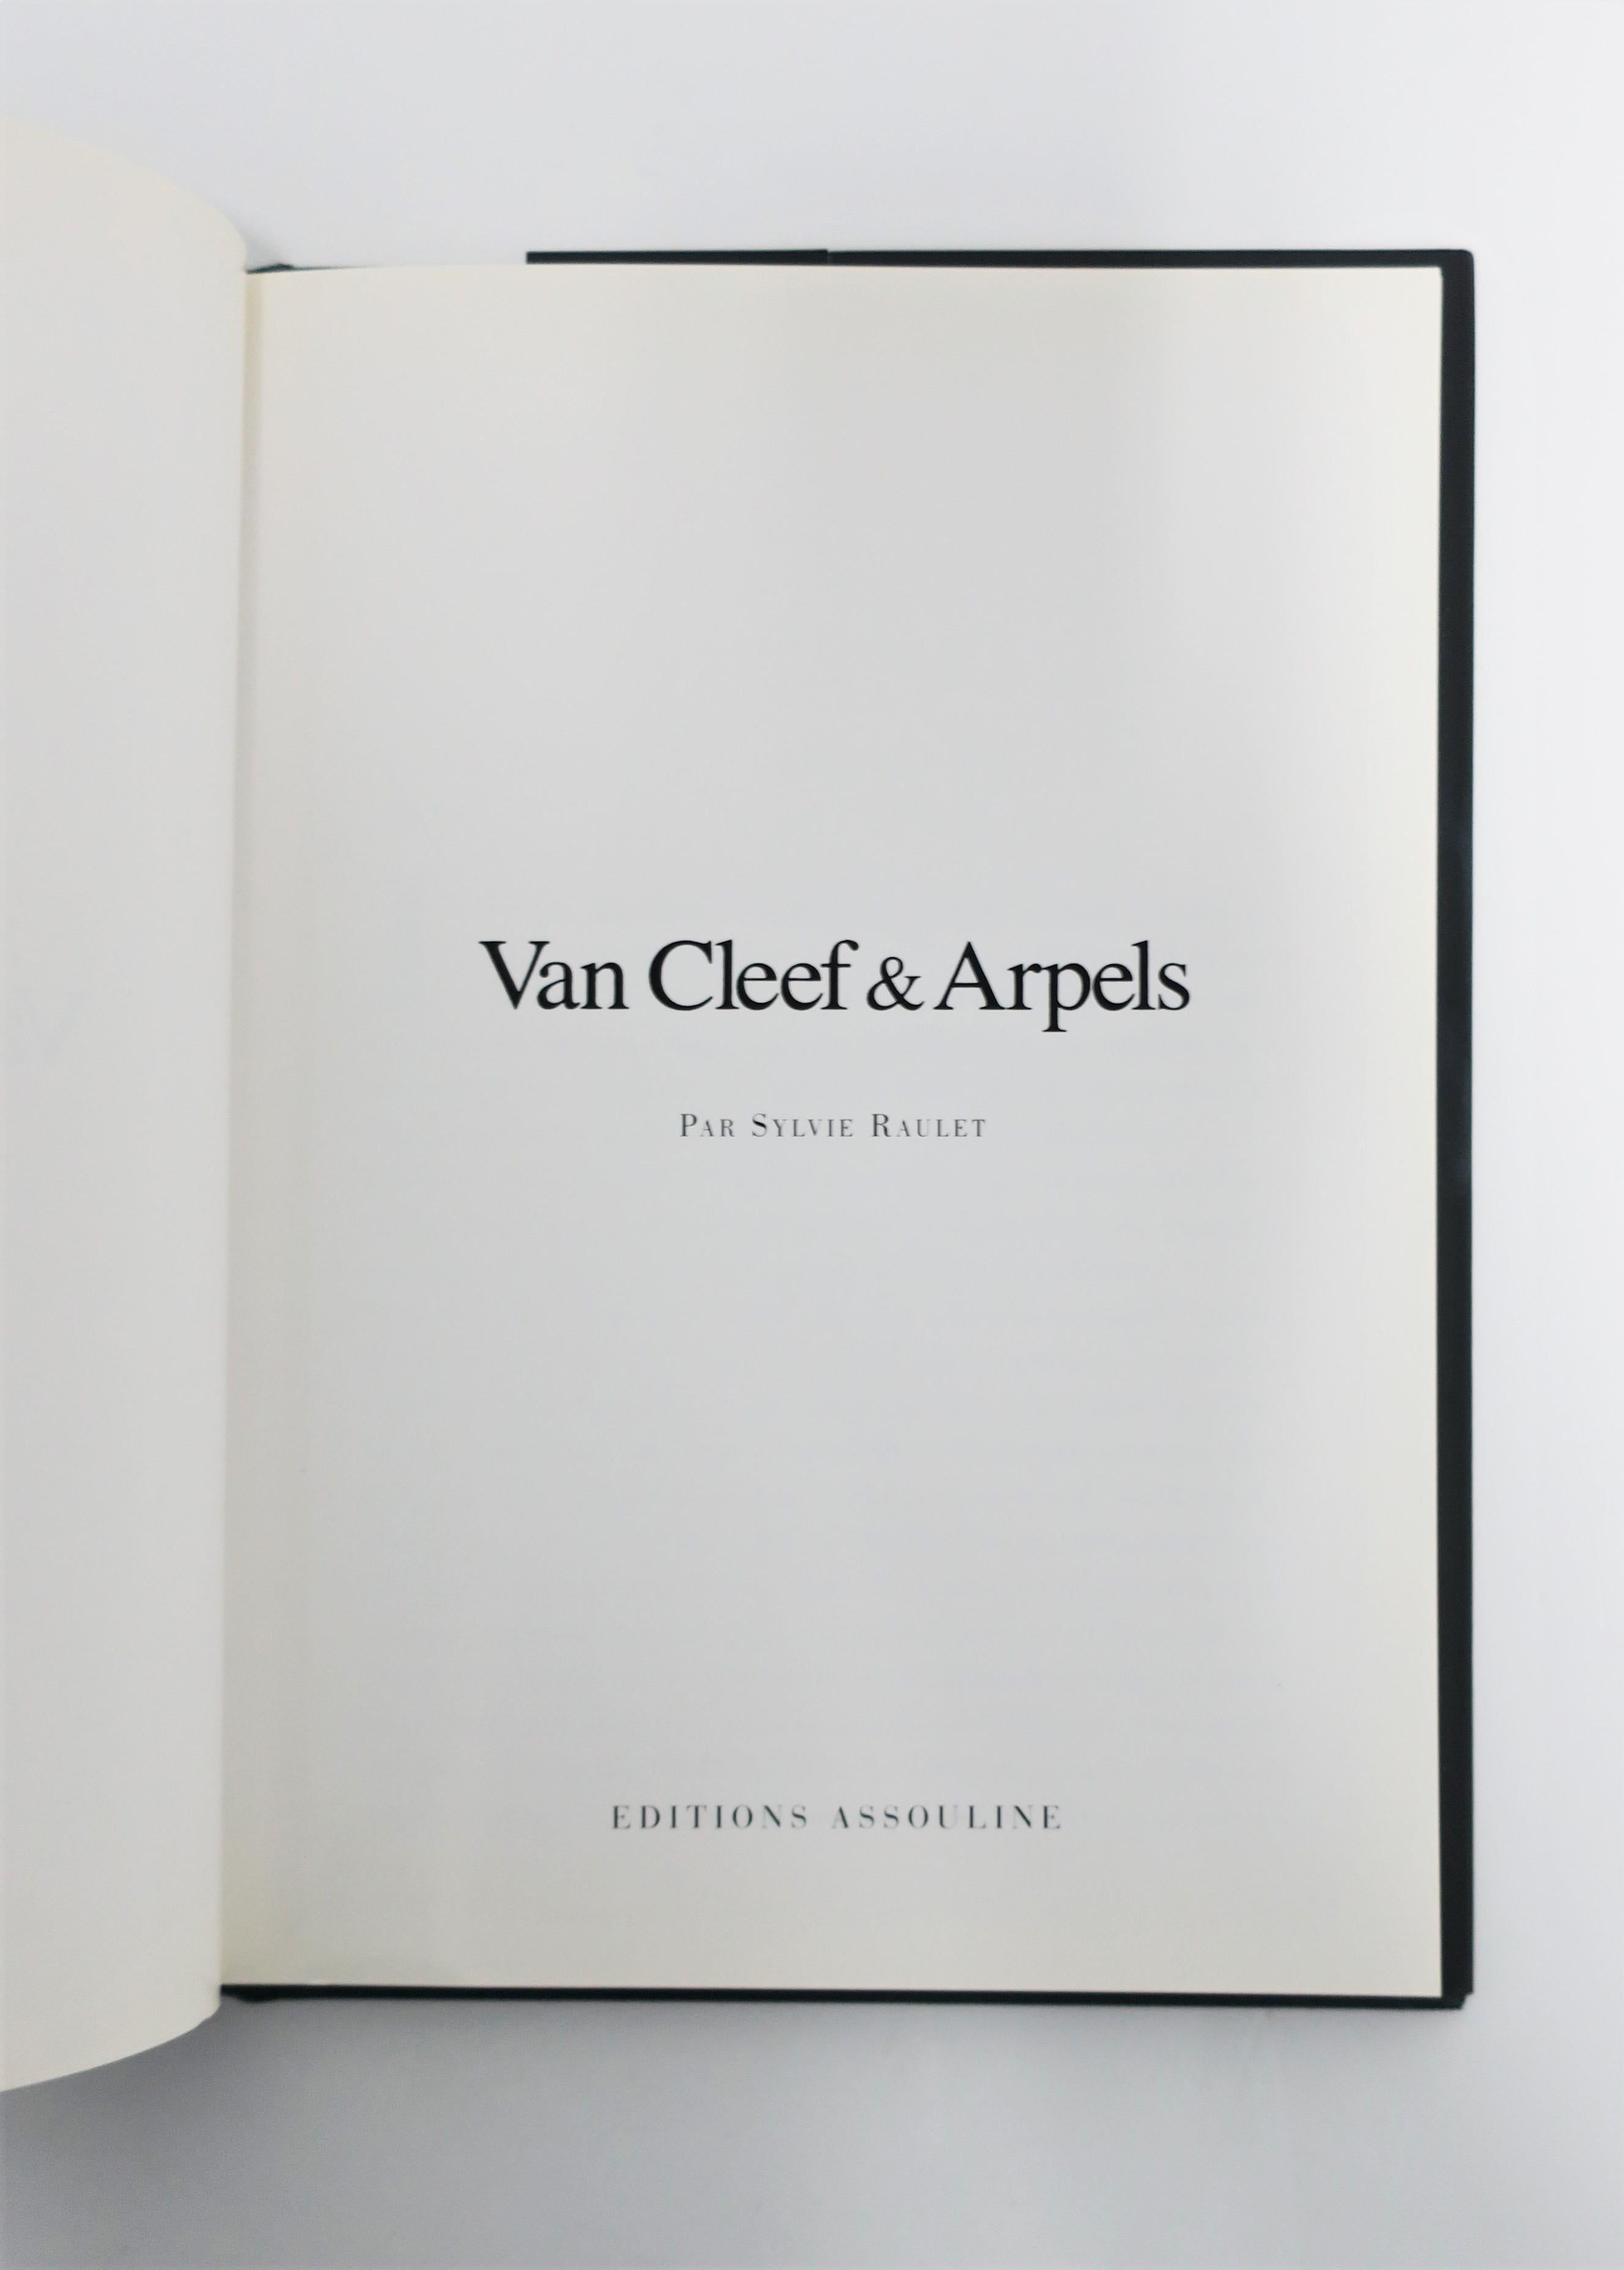 Art Deco Van Cleef & Arpels Library or Coffee Table Book, circa 1990s